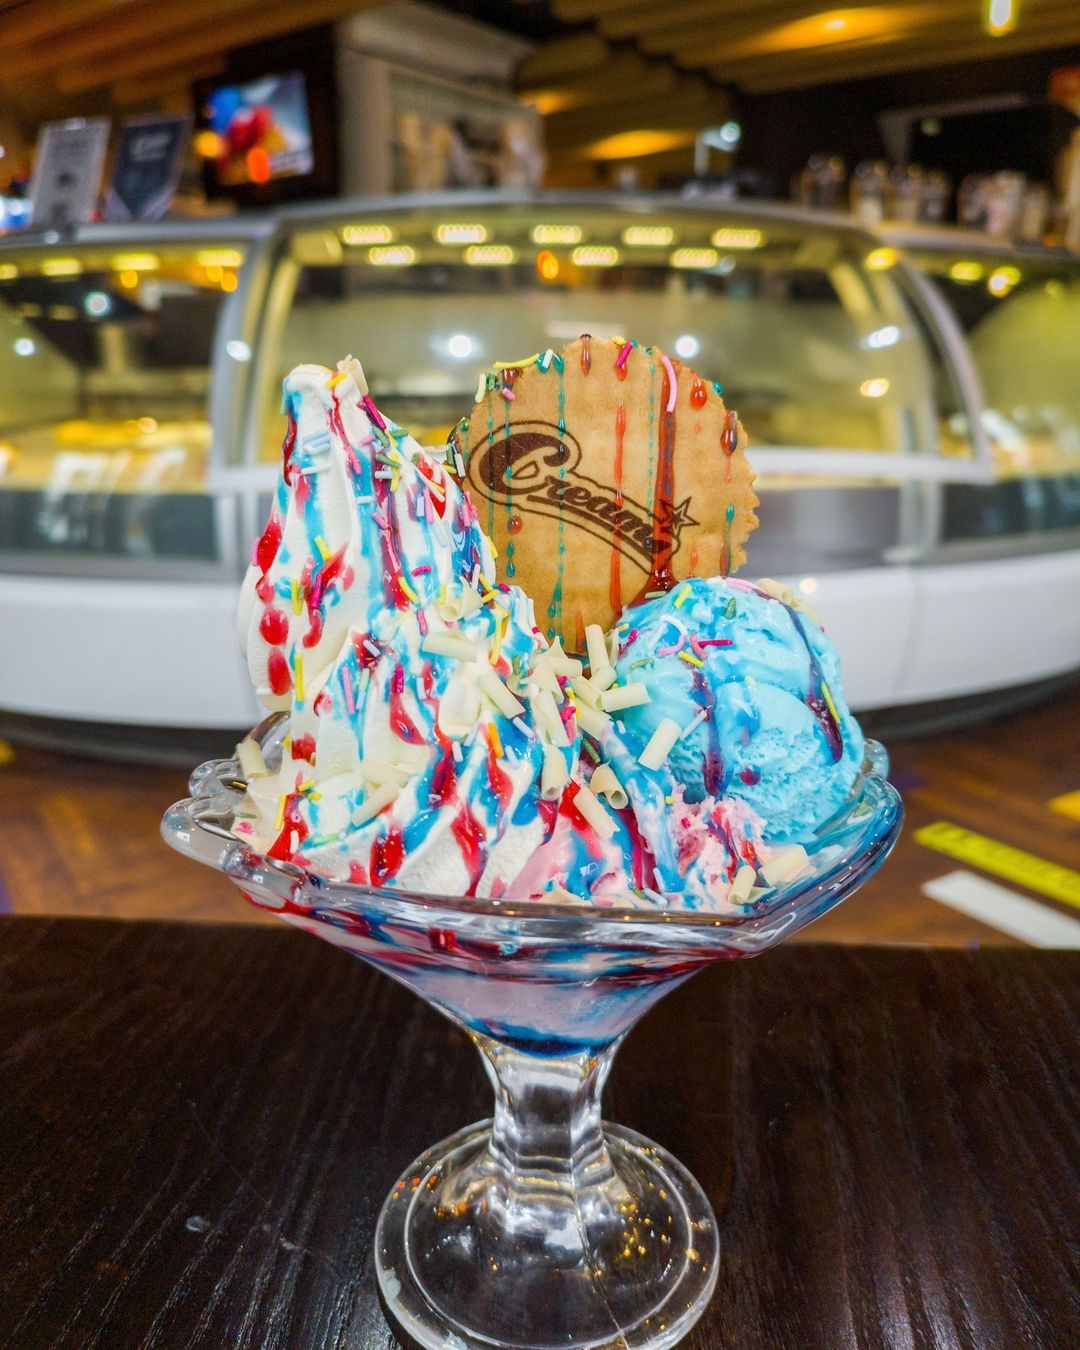 Dessert cafe Creams is opening a huge new site at Manchester Arndale, The Manc